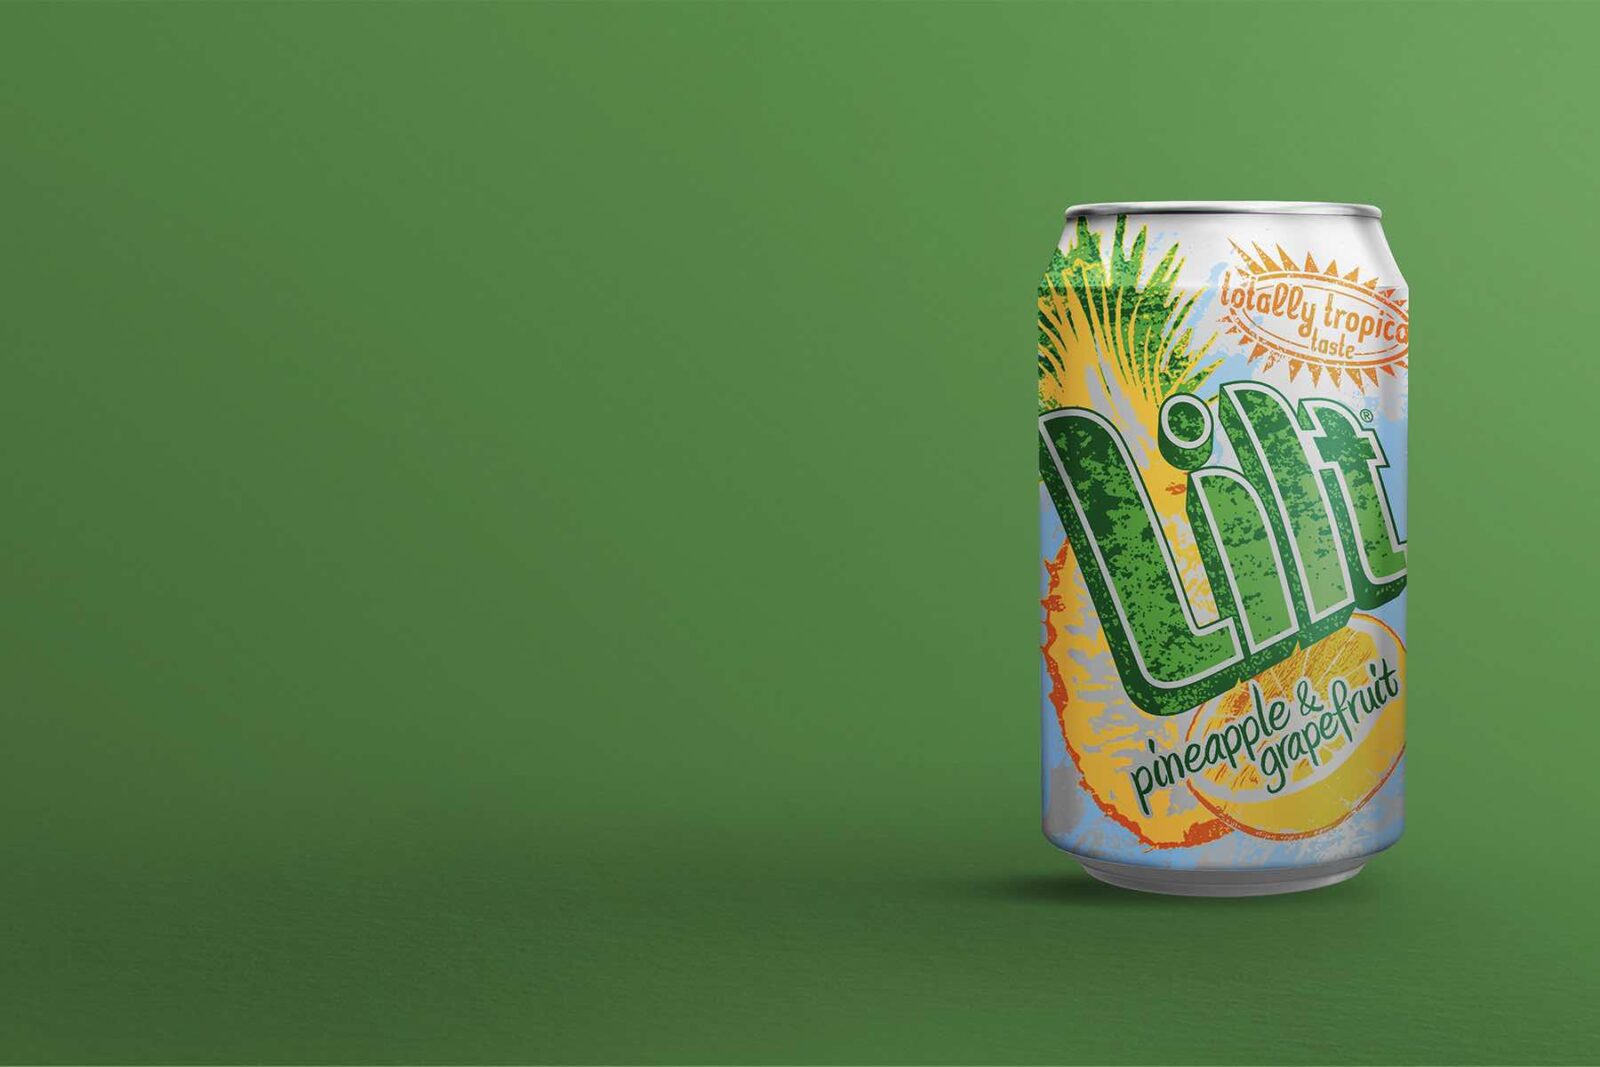 A can of Lilt.